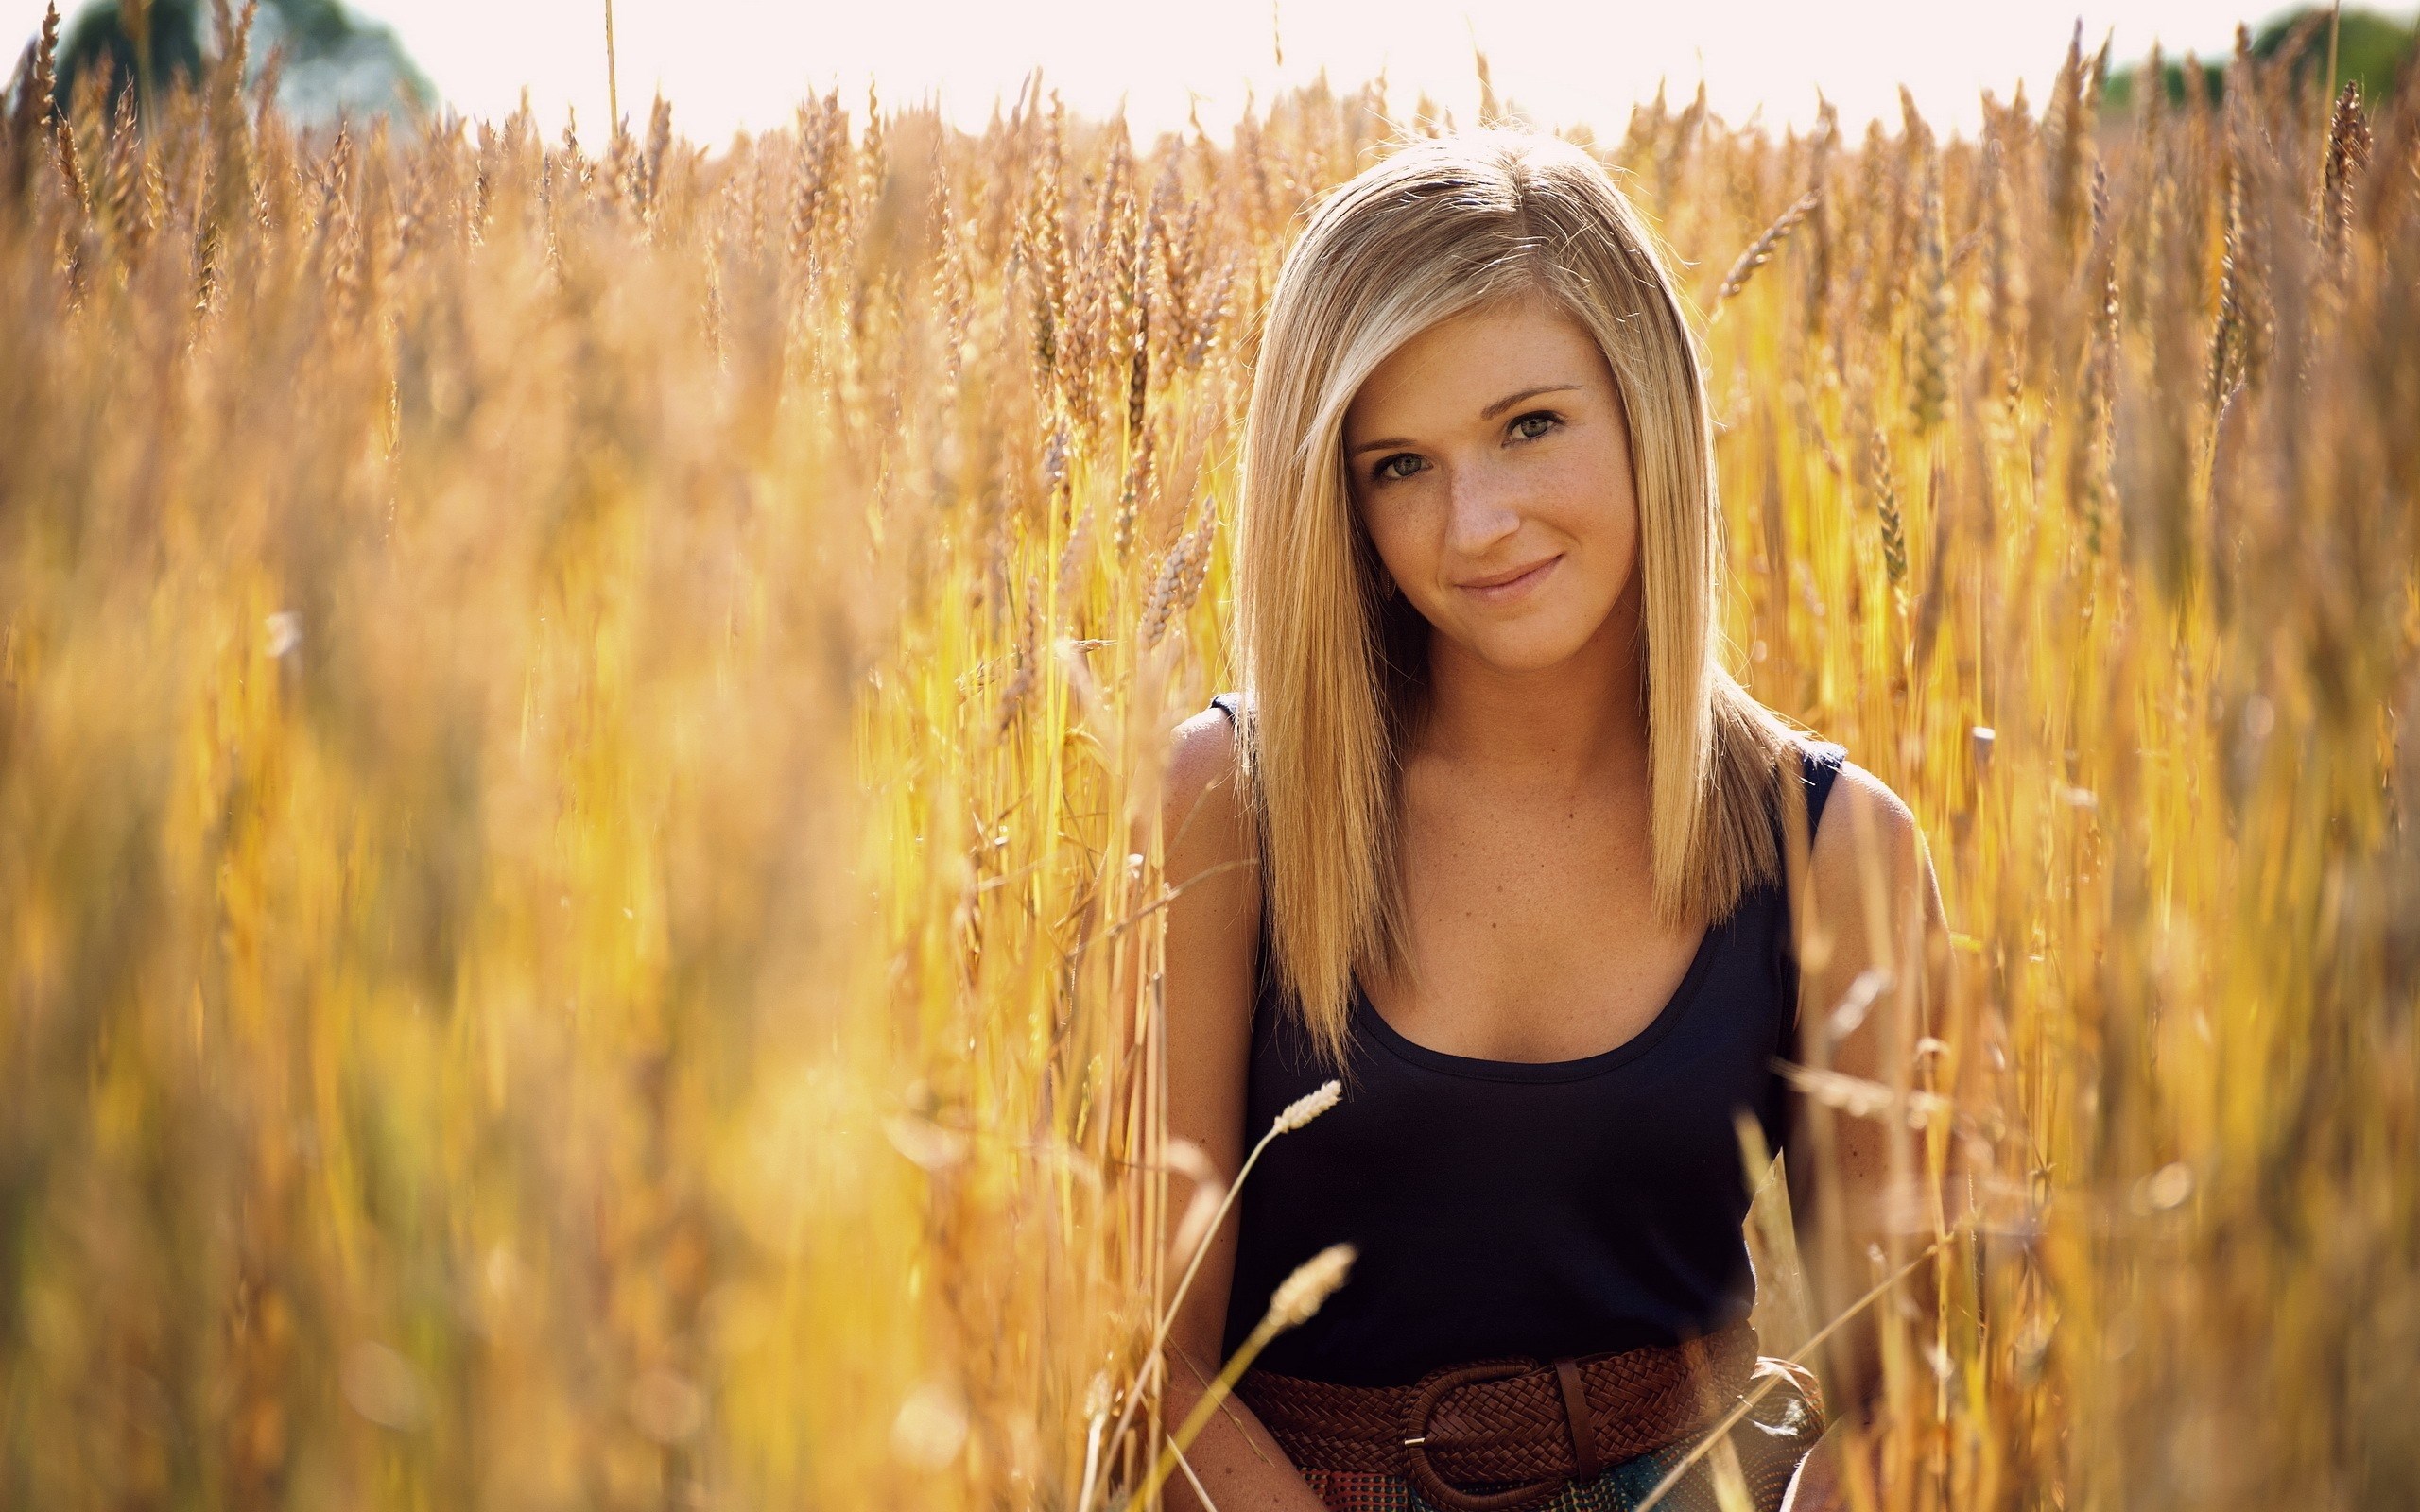 blonde girl wallpaper,people in nature,hair,blond,yellow,field